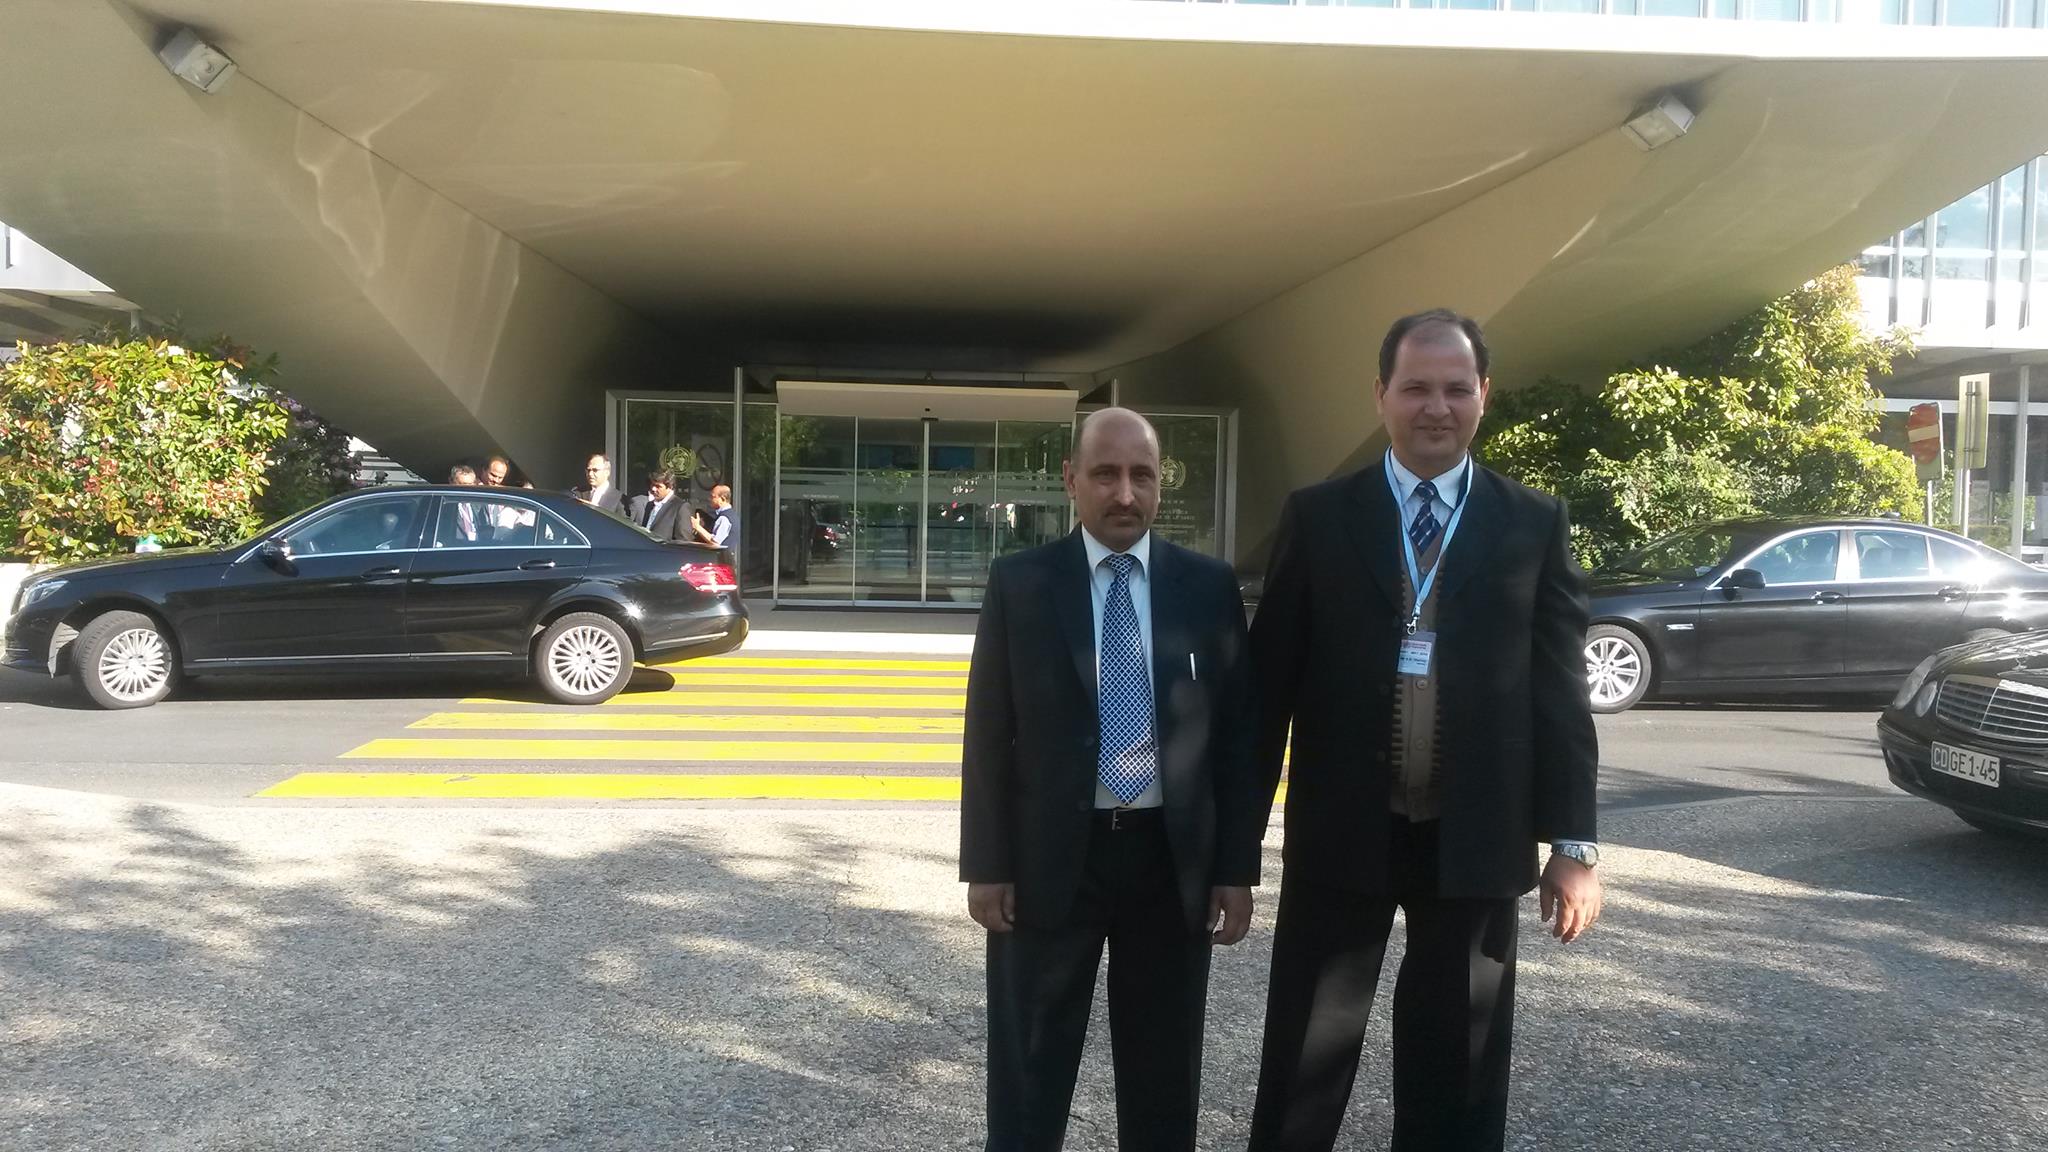 Participated in the World Health Assembly in 2014 Switzerland, Geneva at the World Health Organization headquarters.